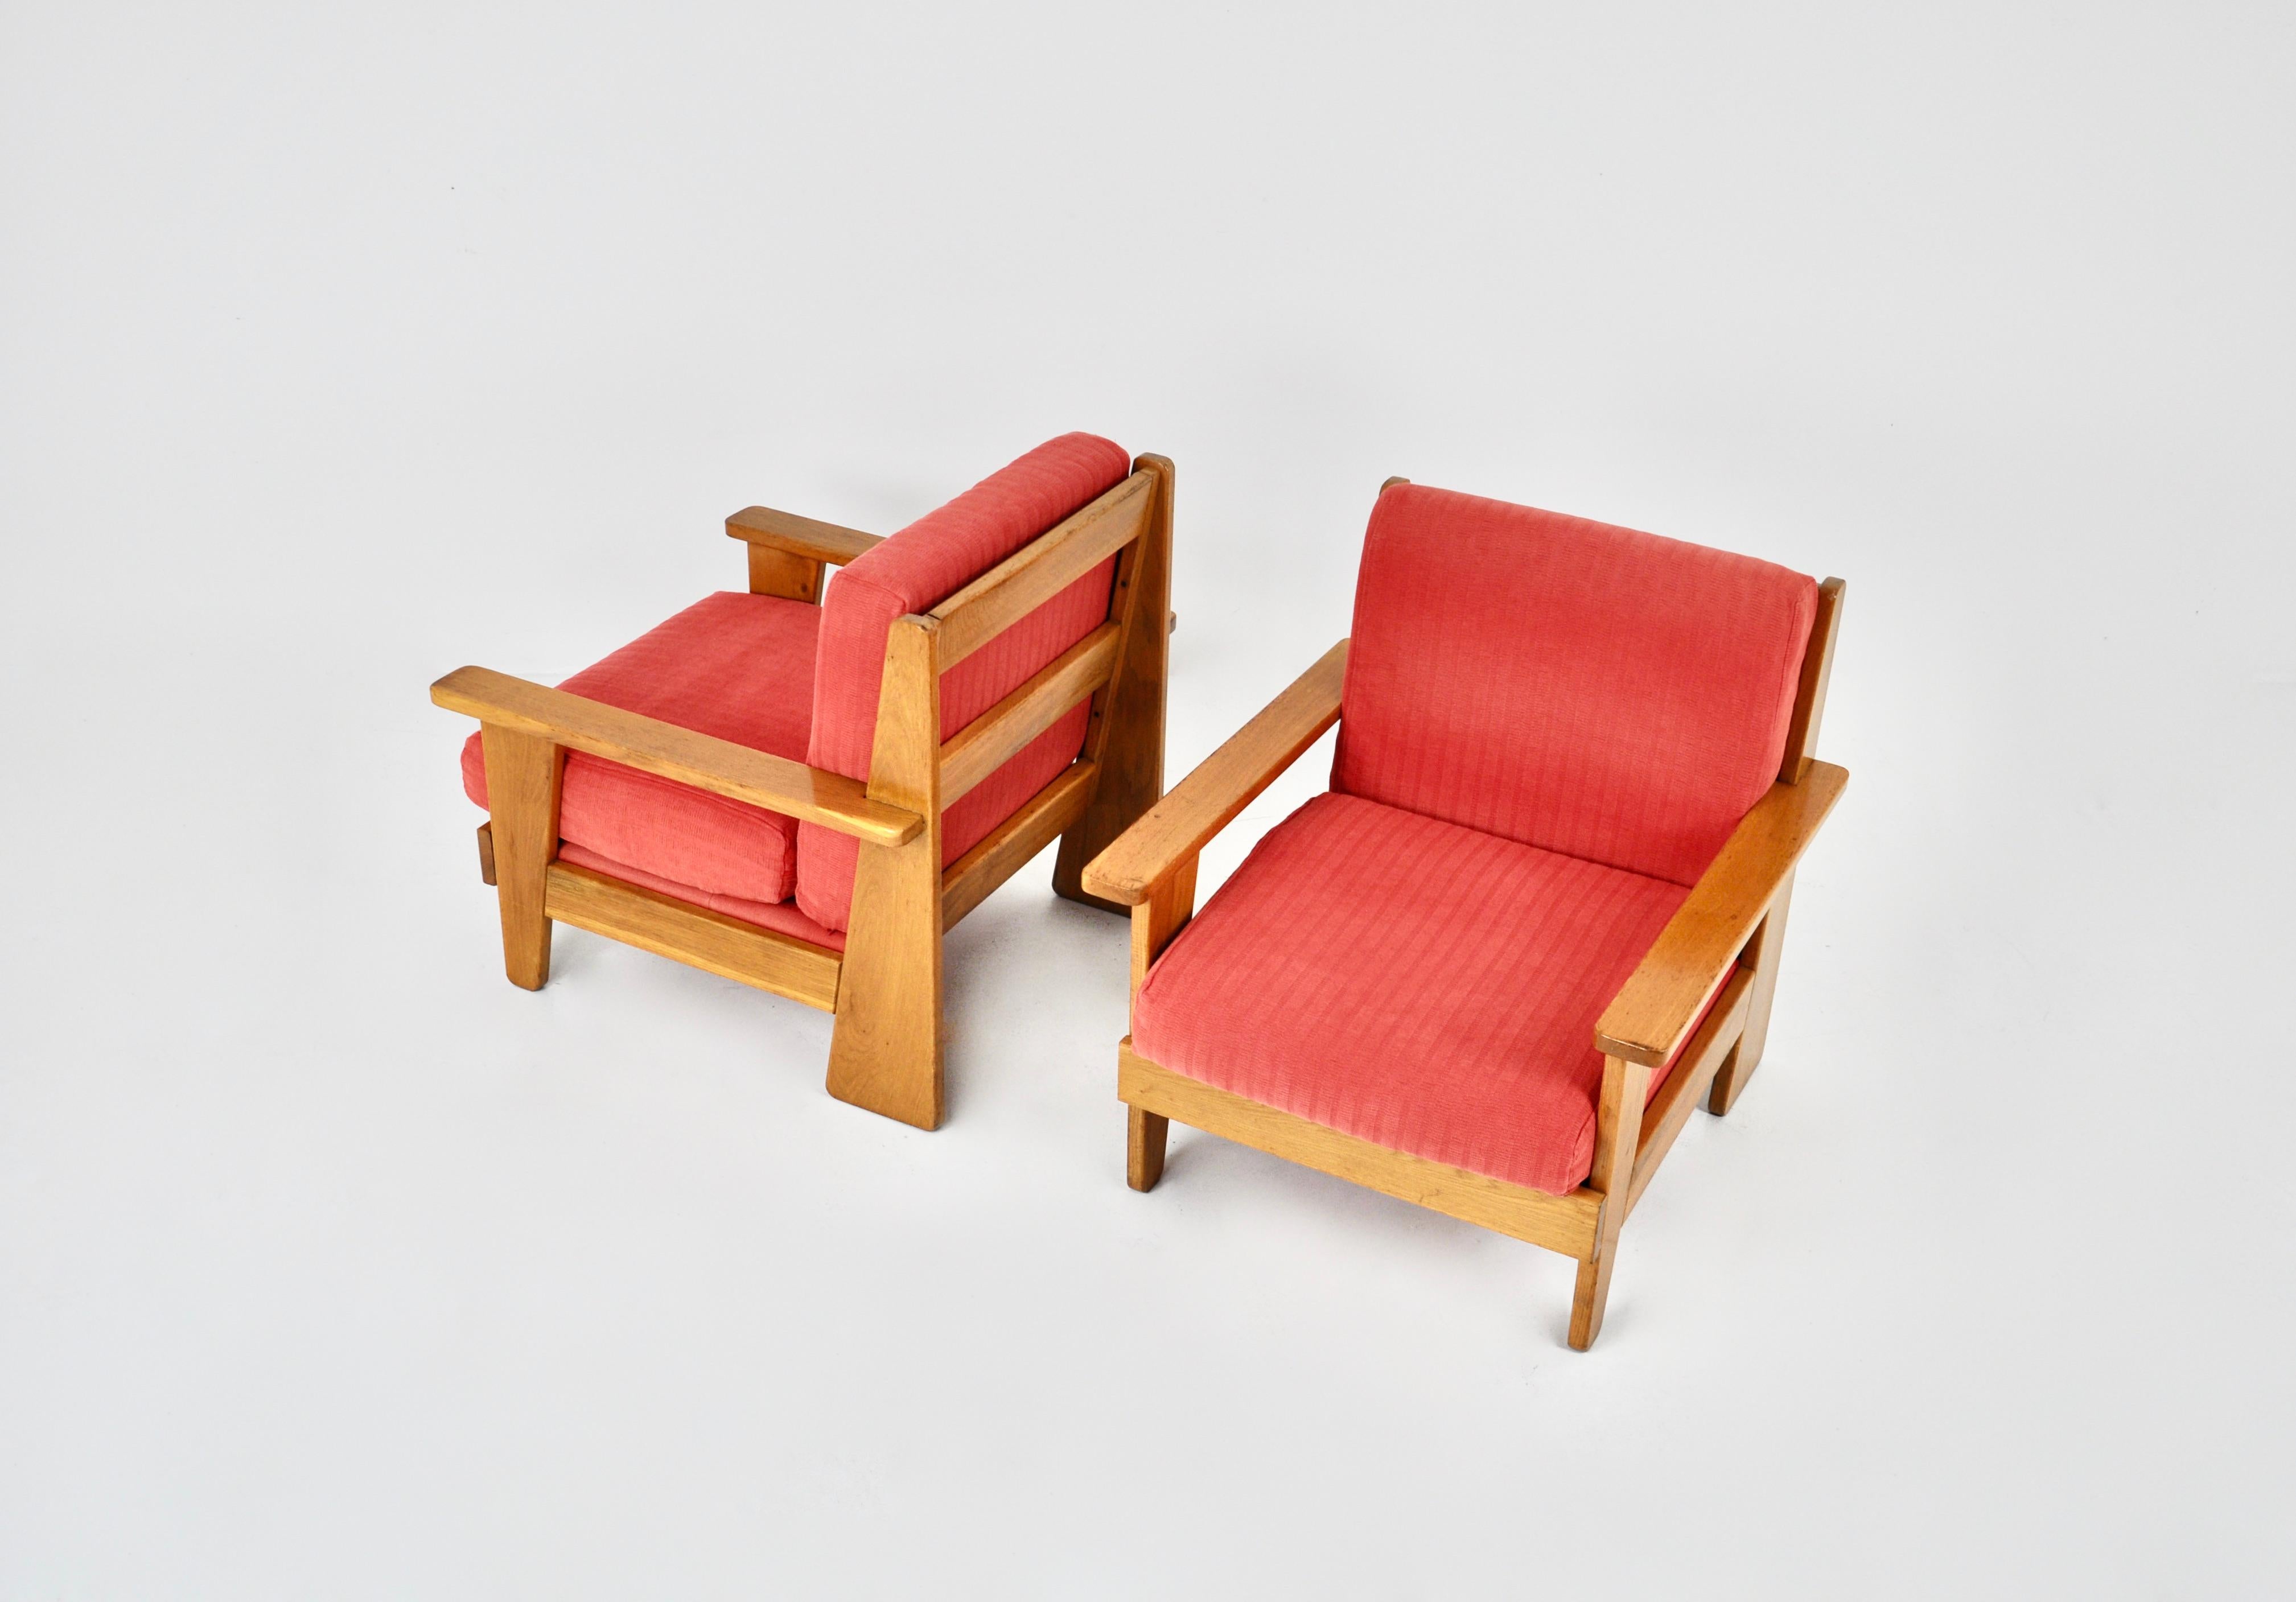 Pair of French armchairs in red fabric and Wood. Seat height: 44 cm. Wear due to time and age of the armchairs.